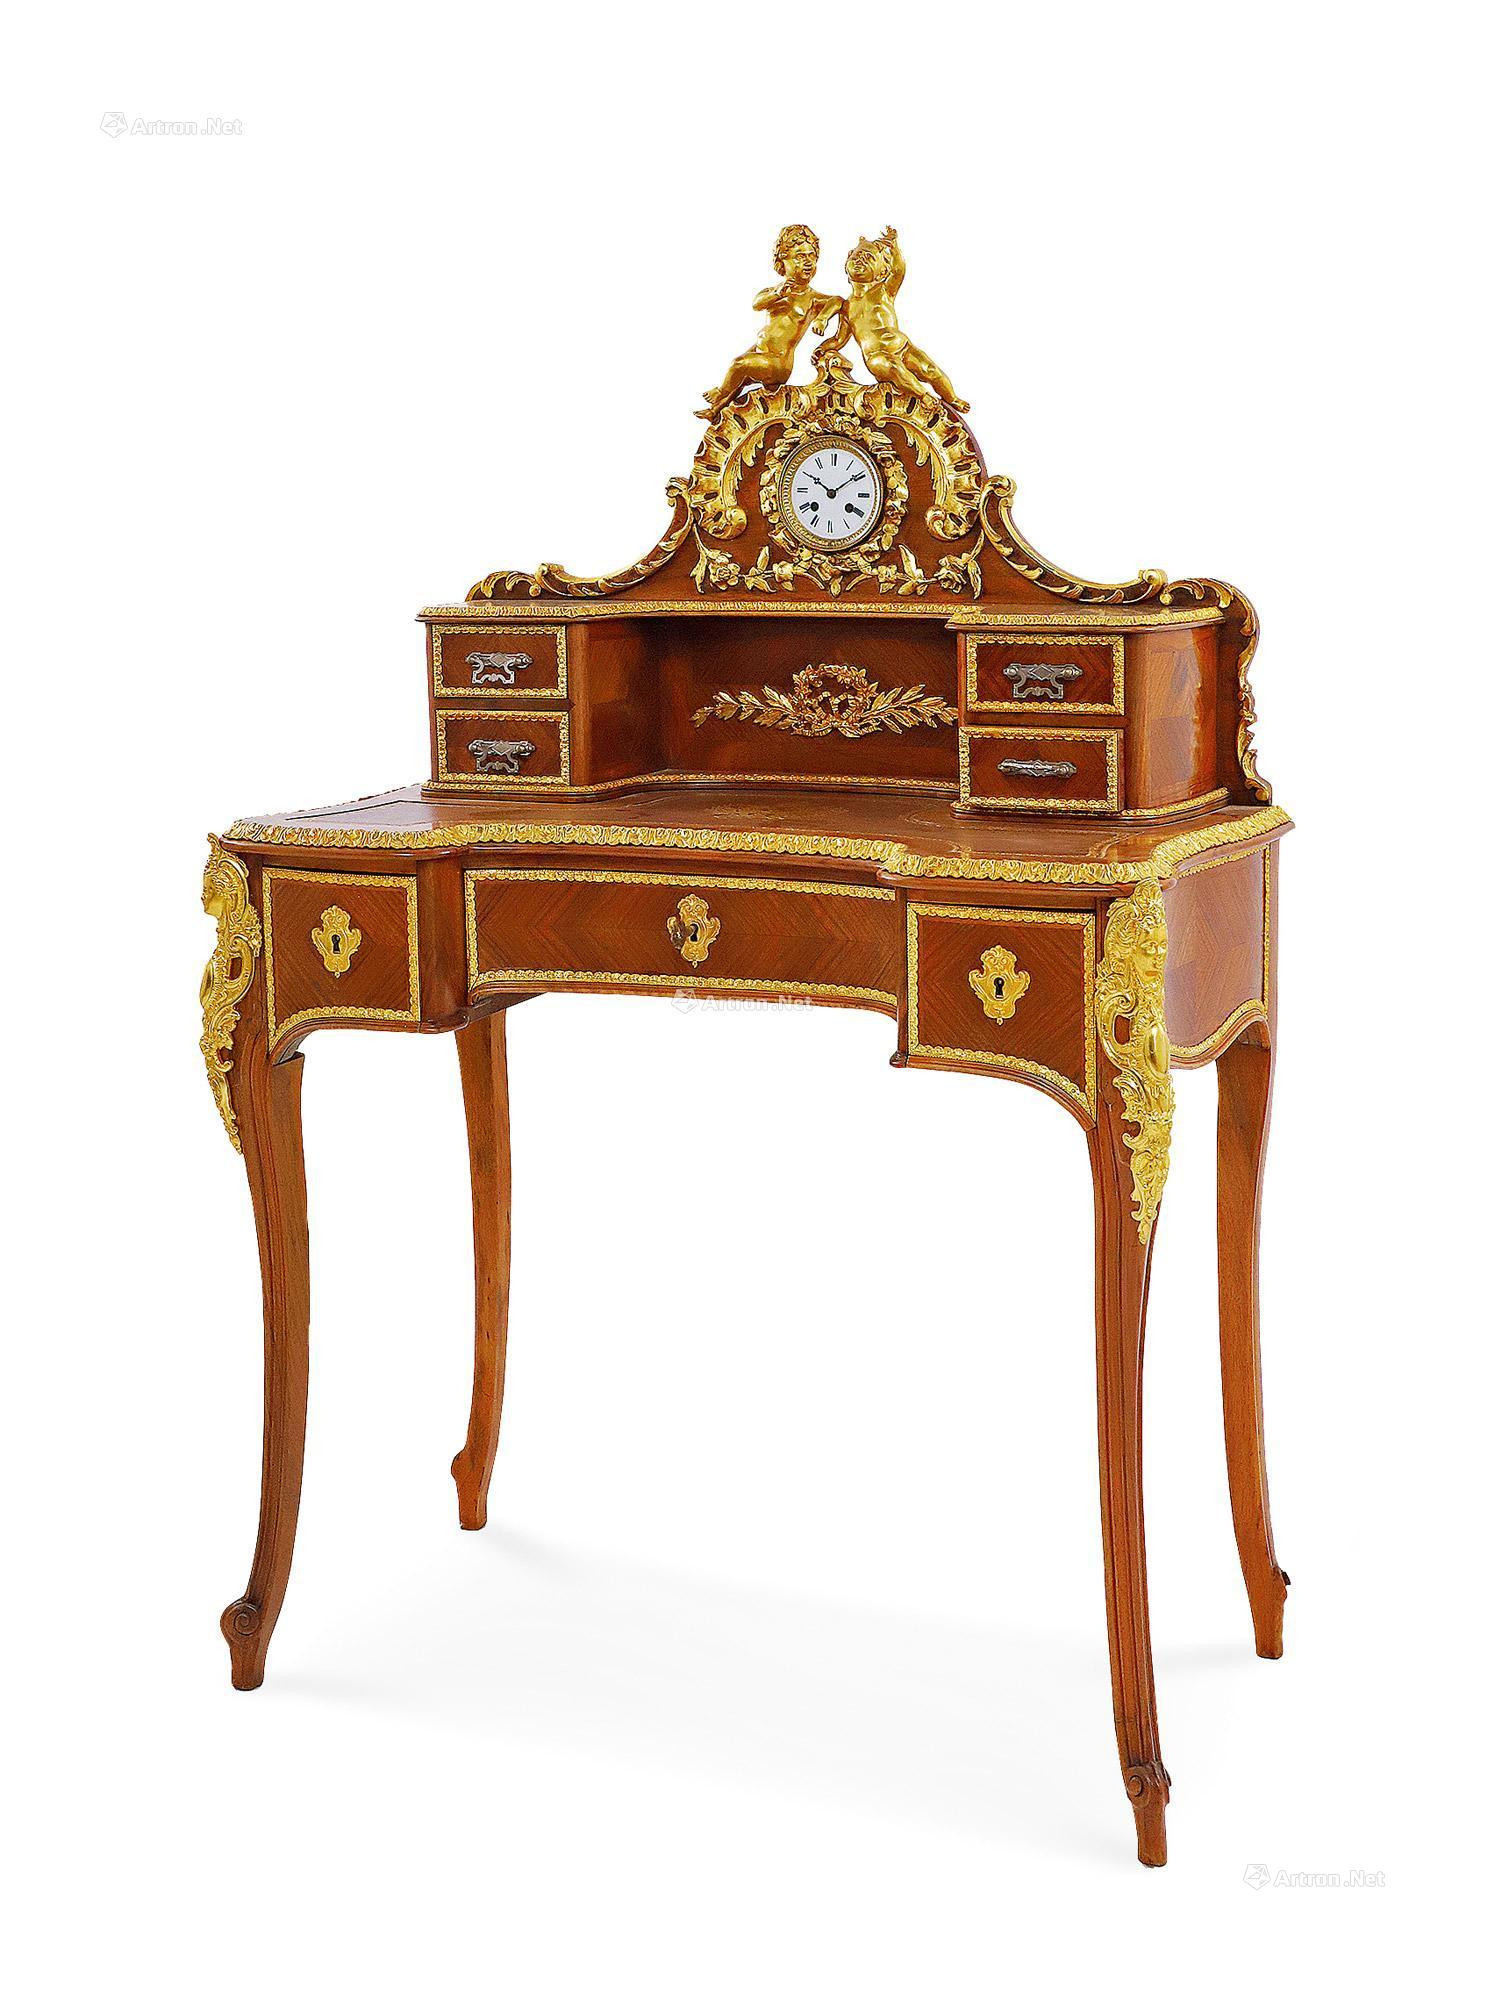 A FRENCH LOUIS XV STYLE MARQUETRY LADY’S WRITING DESK